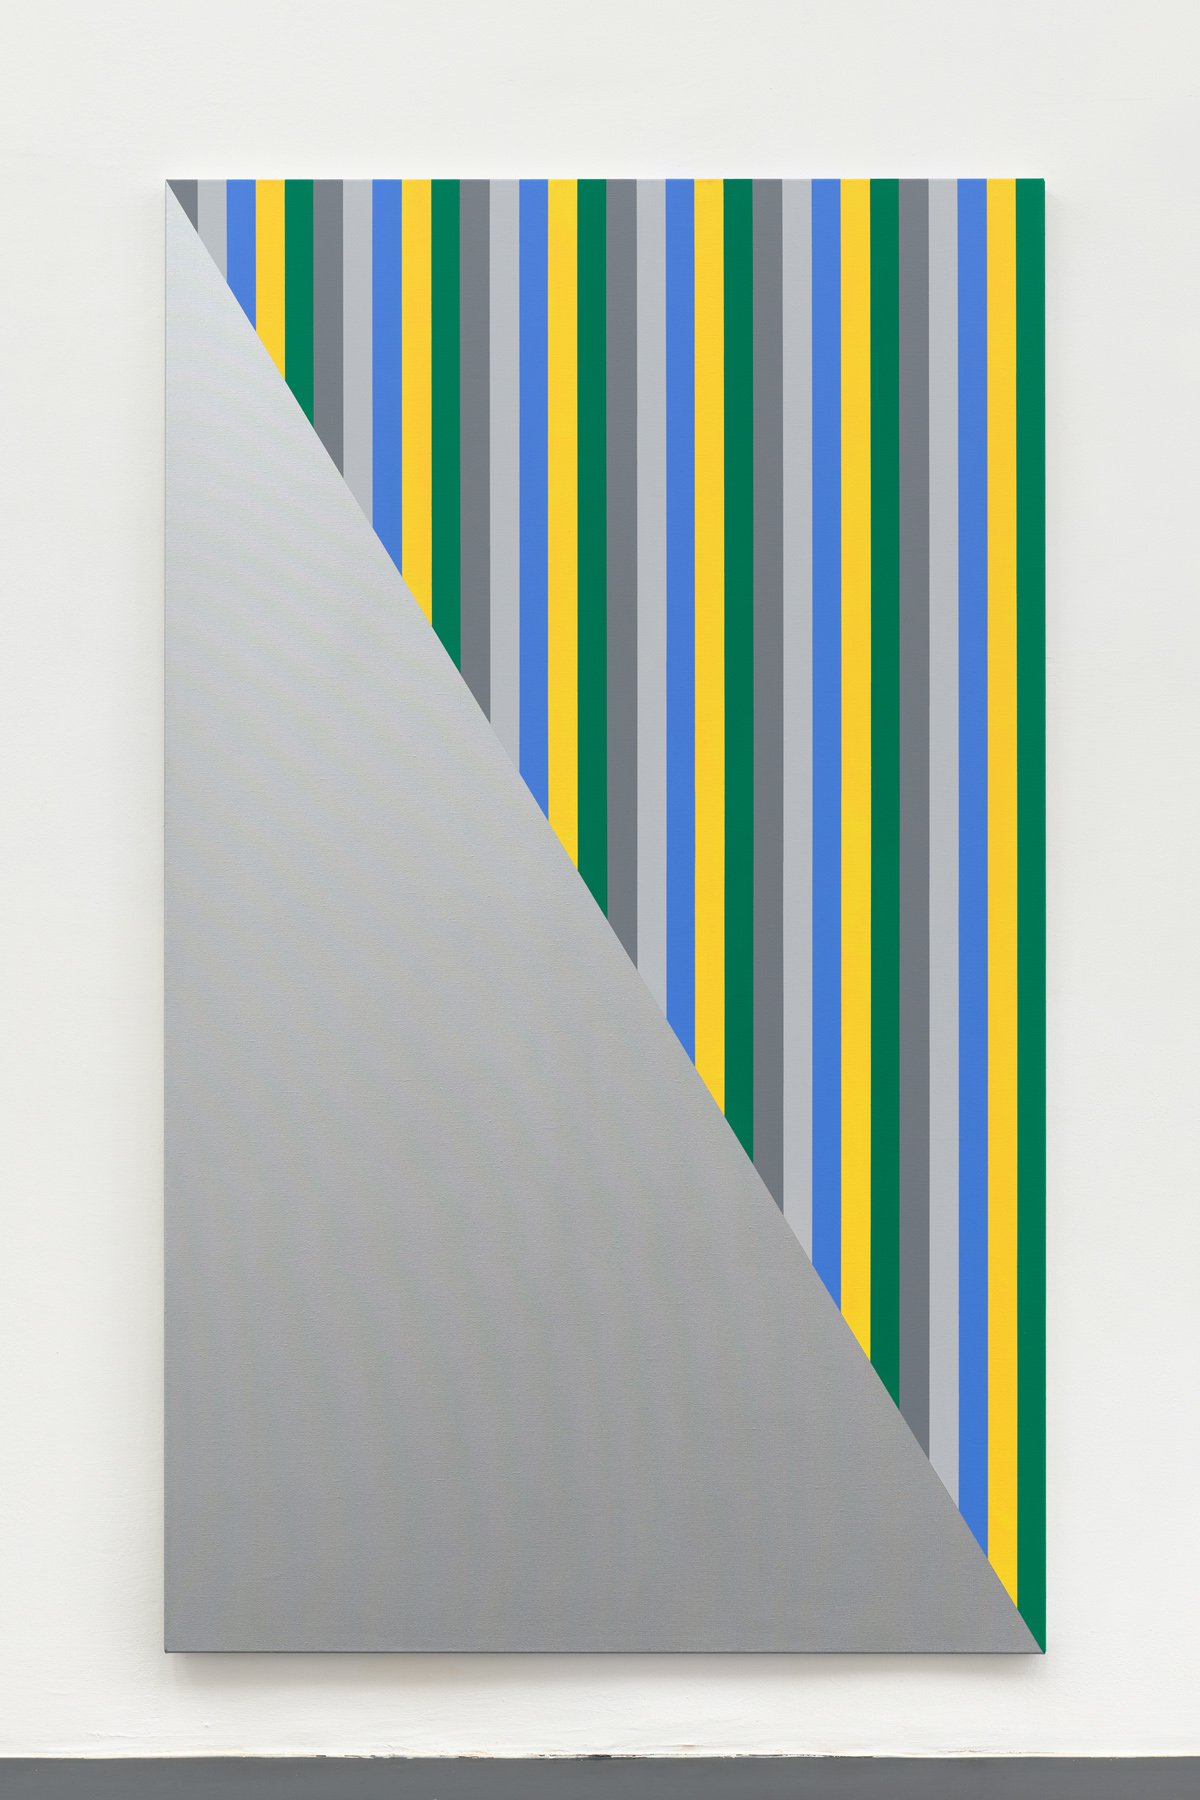 Nick OberthalerO.T. (Map), 2019Acrylic and gesso on linen200 x 120 cm